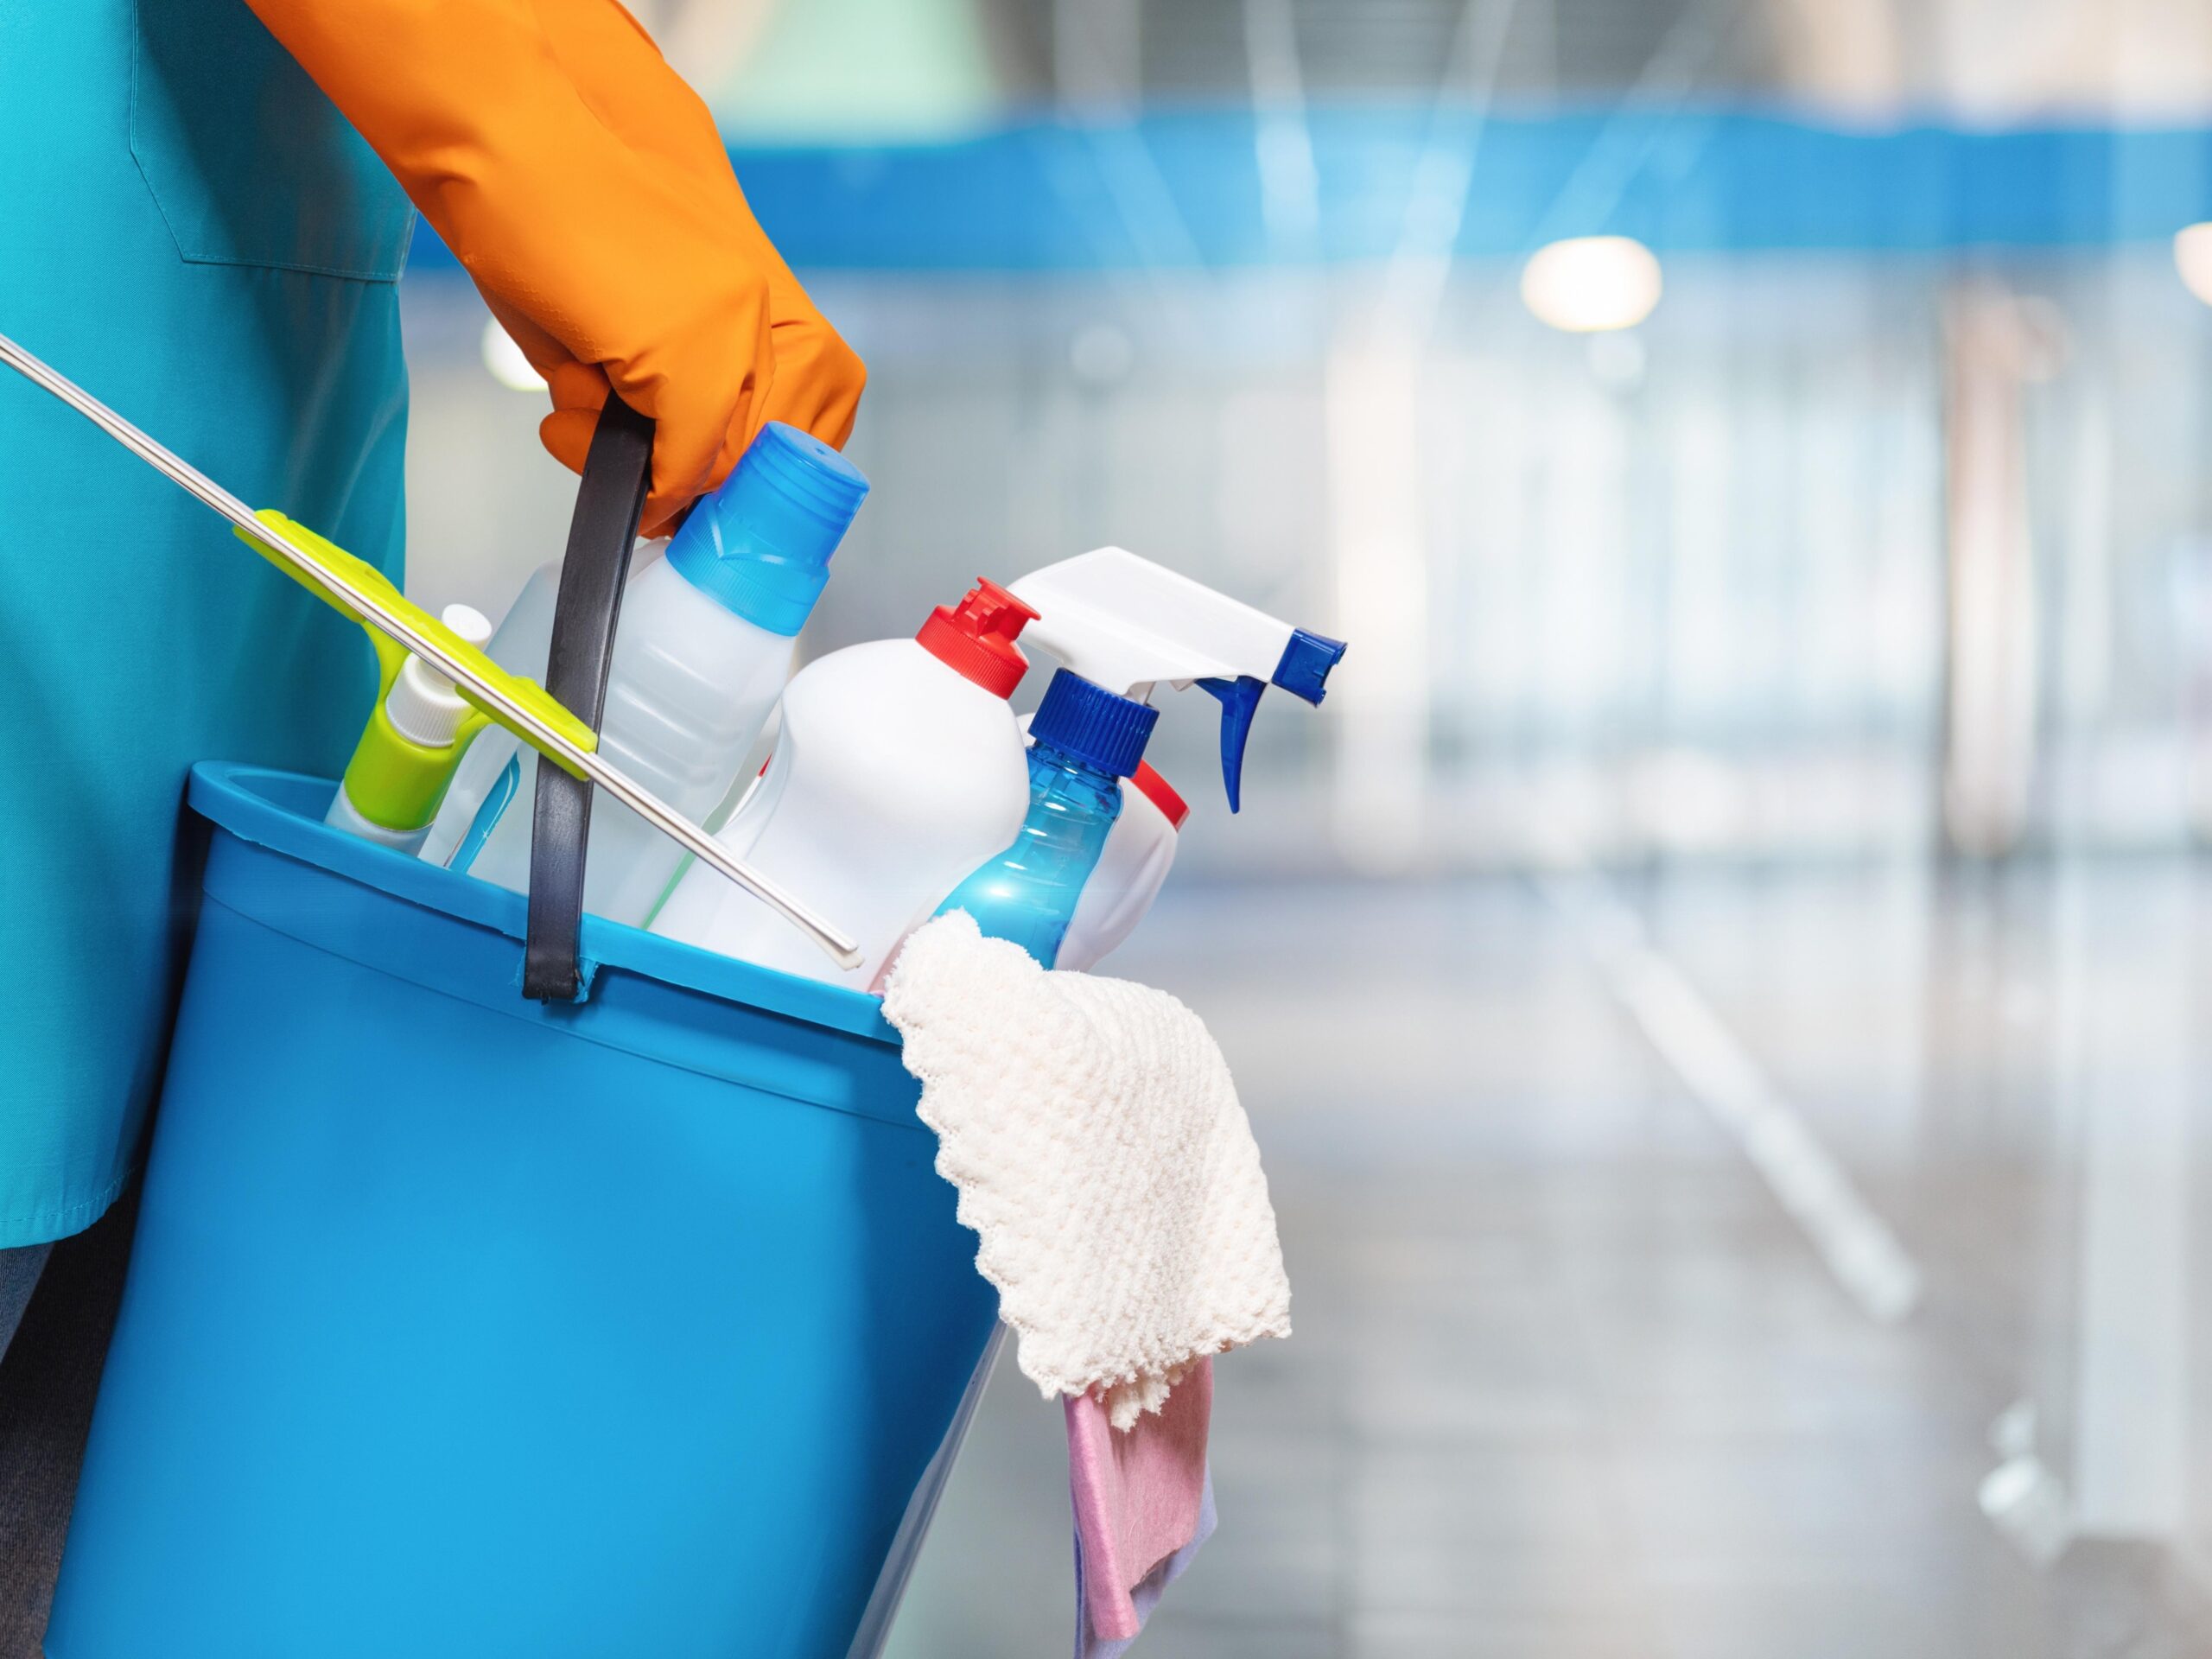 The concept of cleaning services. A cleaning lady is holding a bucket of cleaning products.